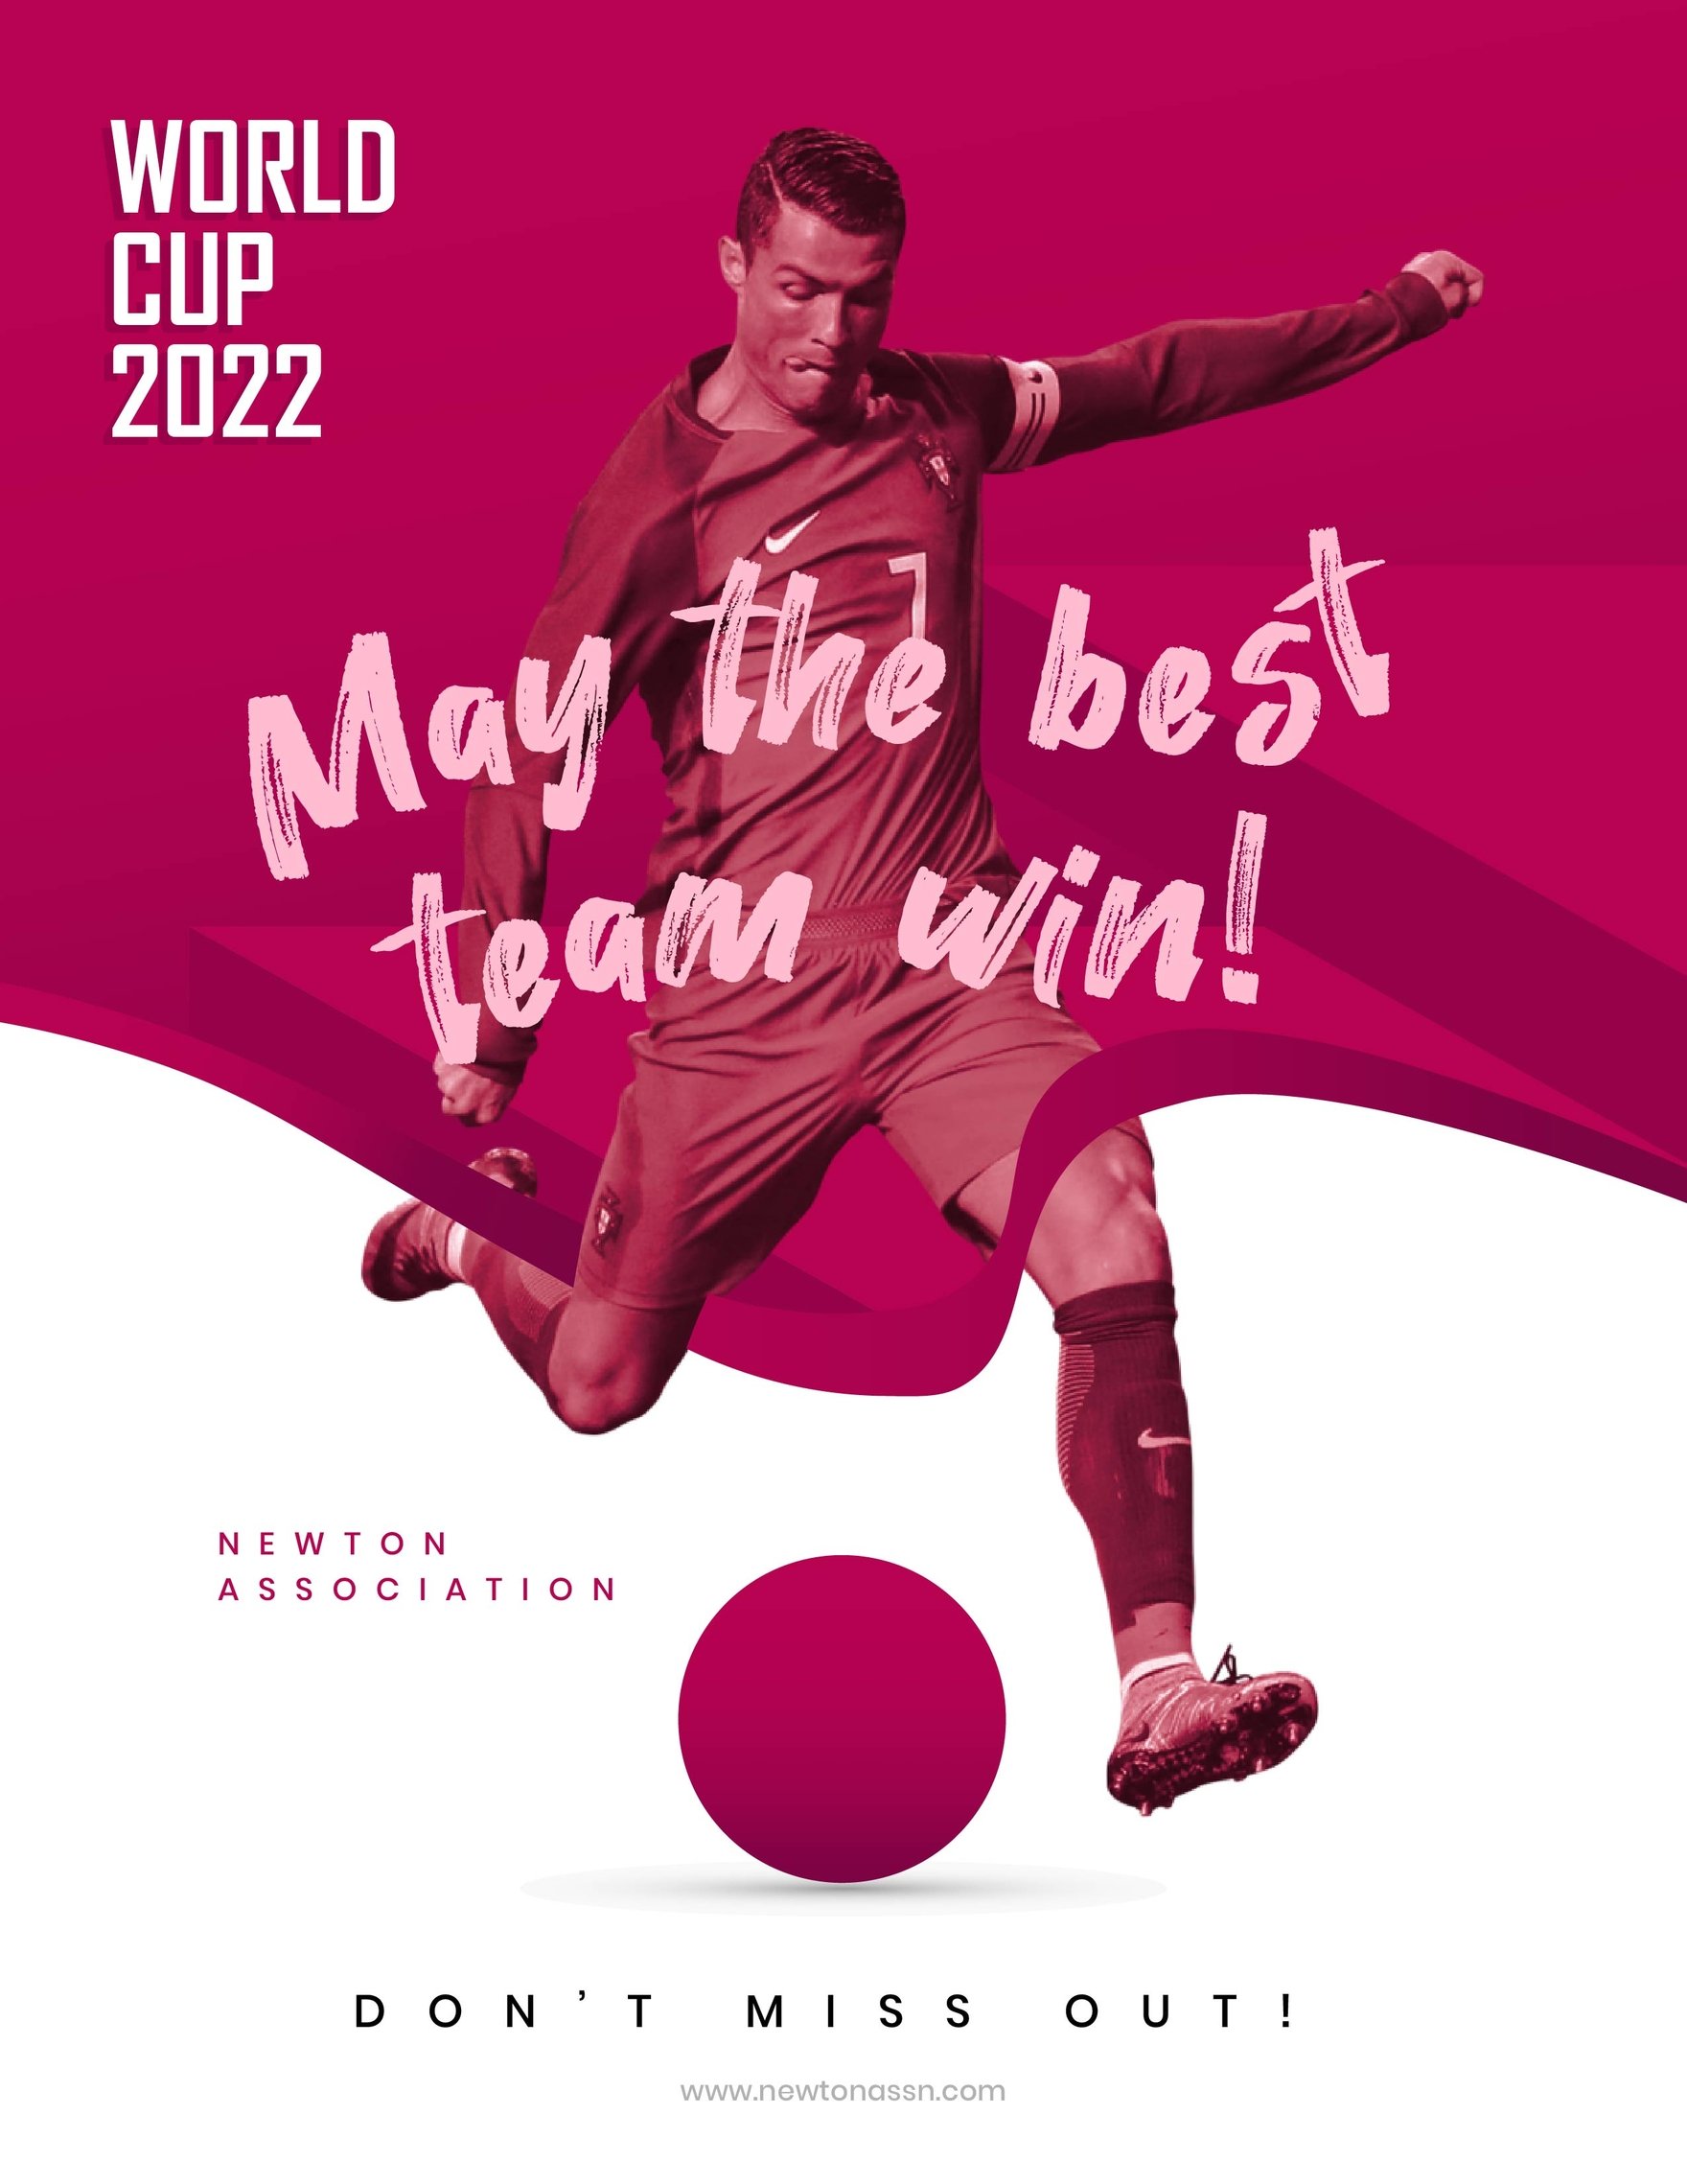 World Cup 2022 Flyer